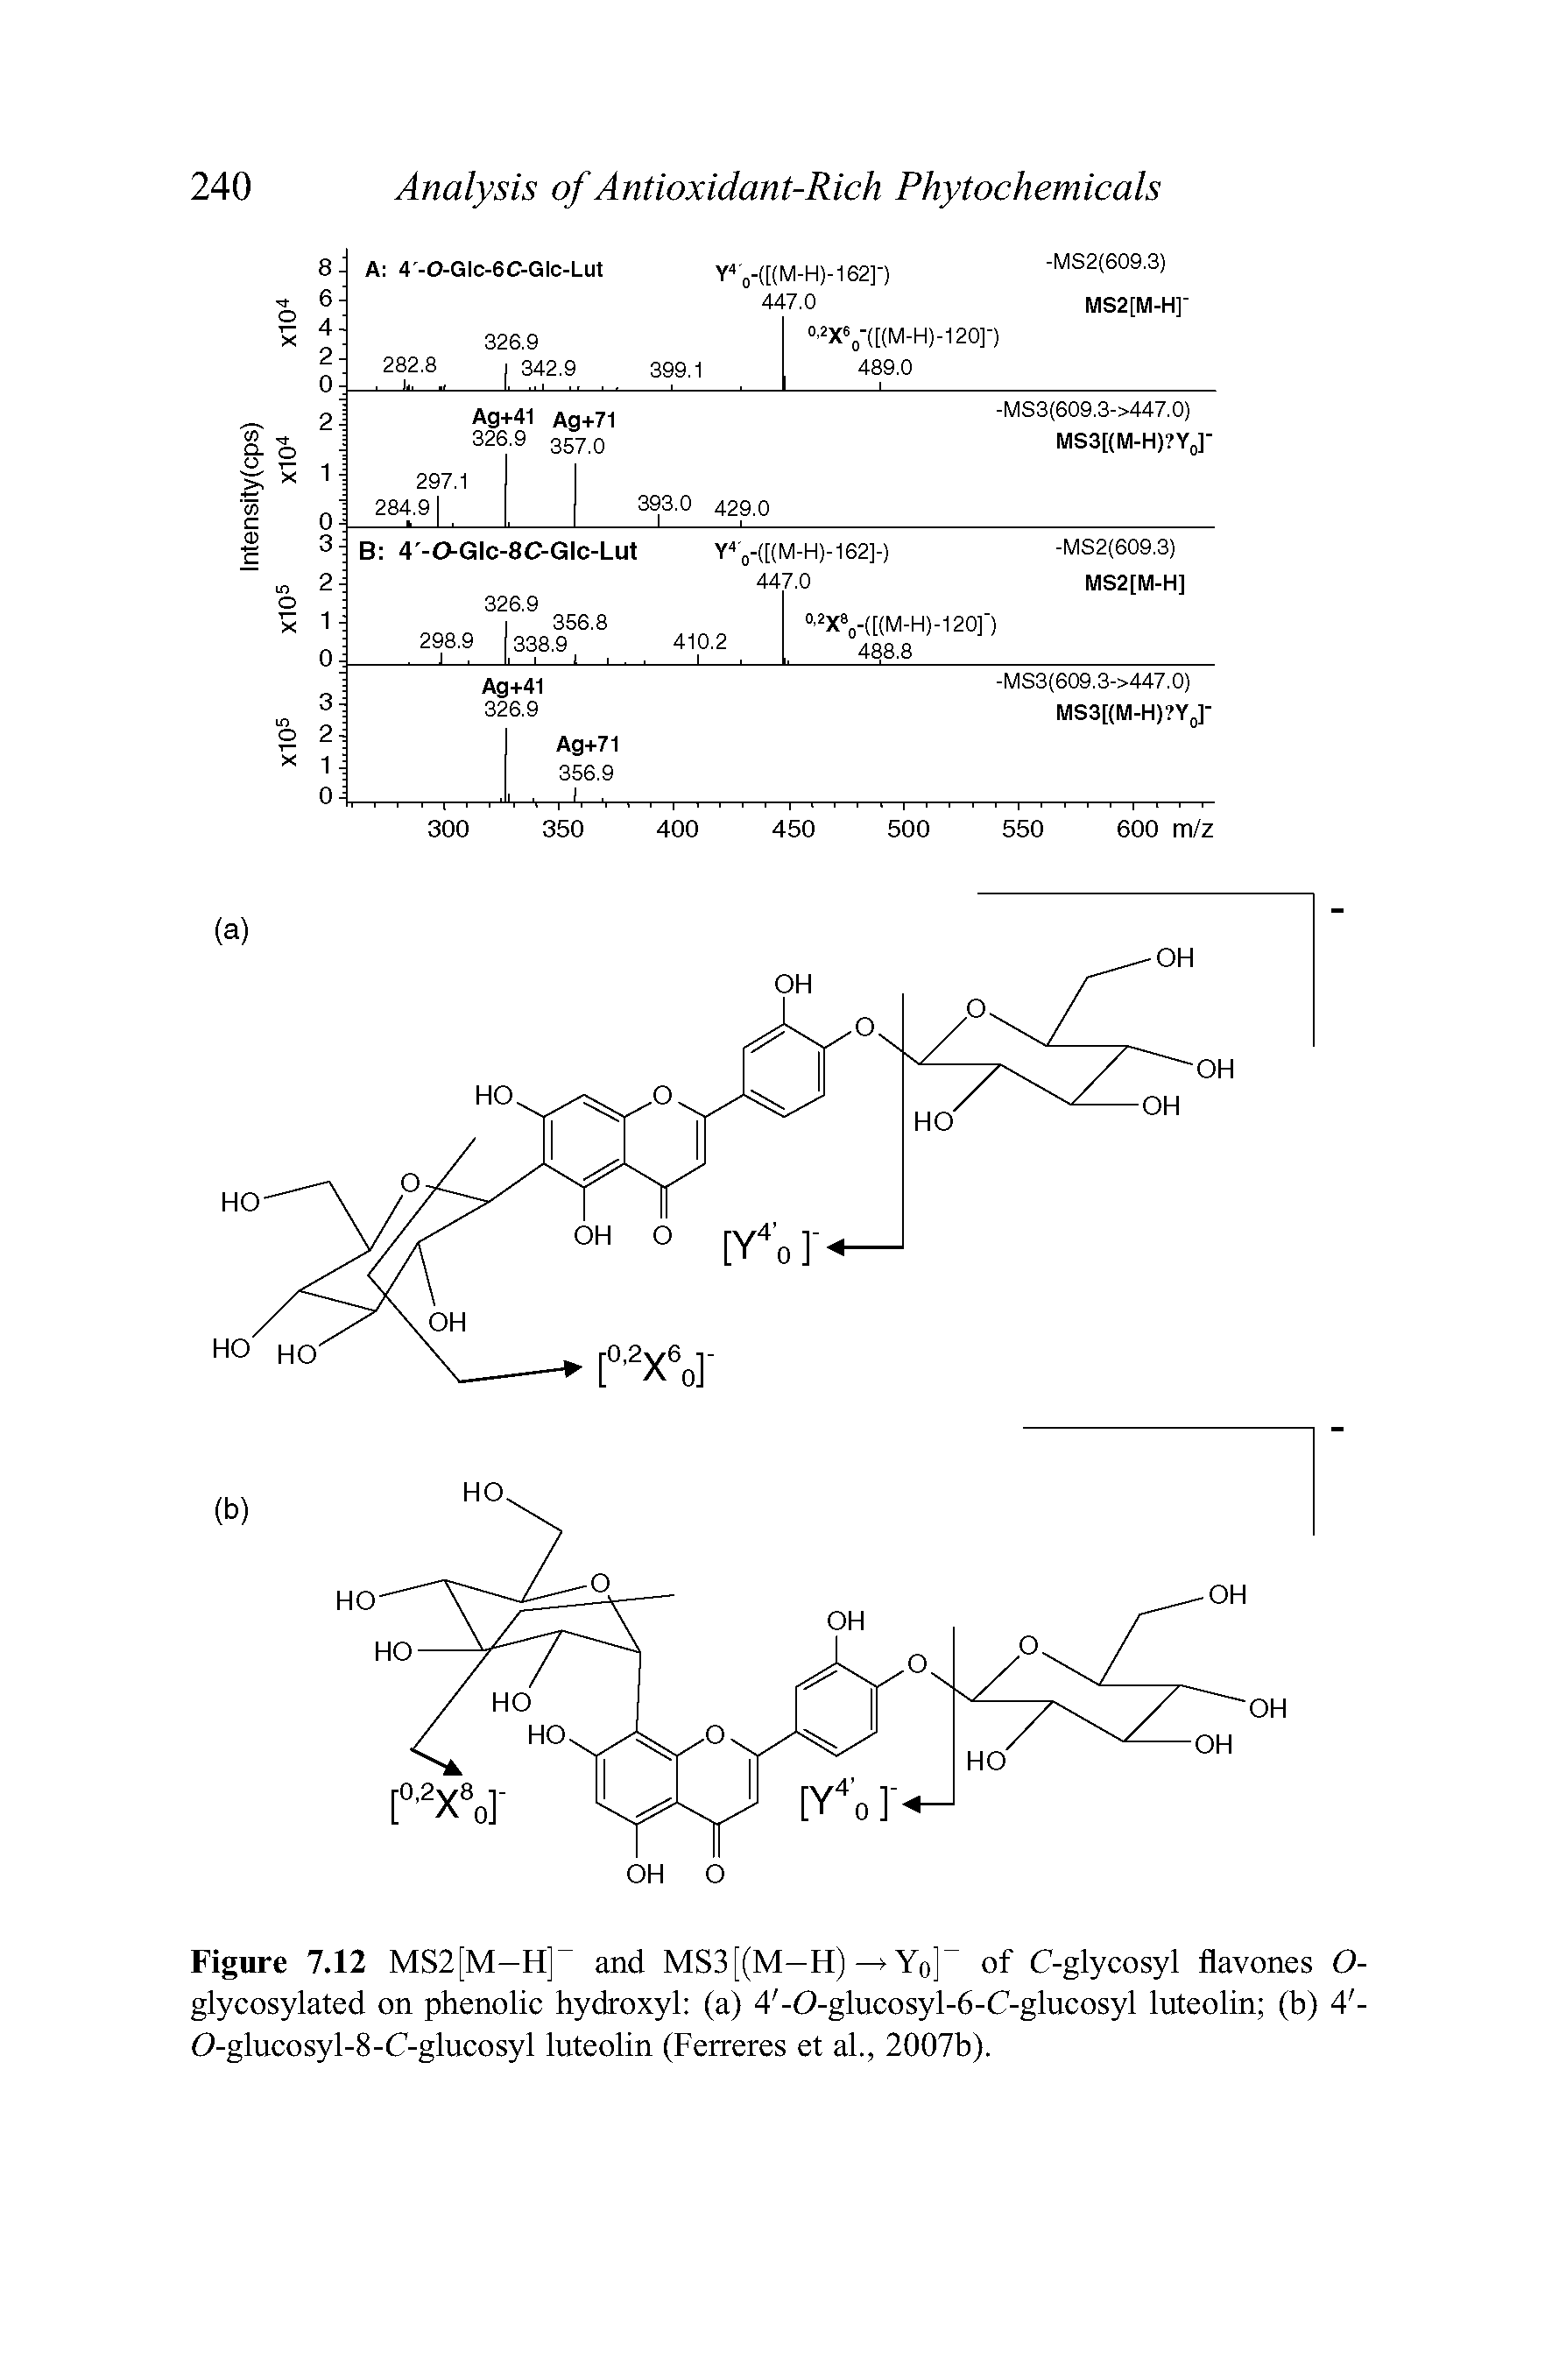 Figure 7.12 MS2[M—H] and MS3[(M—H) Yq] of C-glycosyl flavones O-glycosylated on phenolic hydroxyl (a) 4 -0-glucosyl-6-C-glucosyl luteolin (b) 4 -O-glucosyl-8-C-glucosyl luteolin (Ferreres et ah, 2007b).